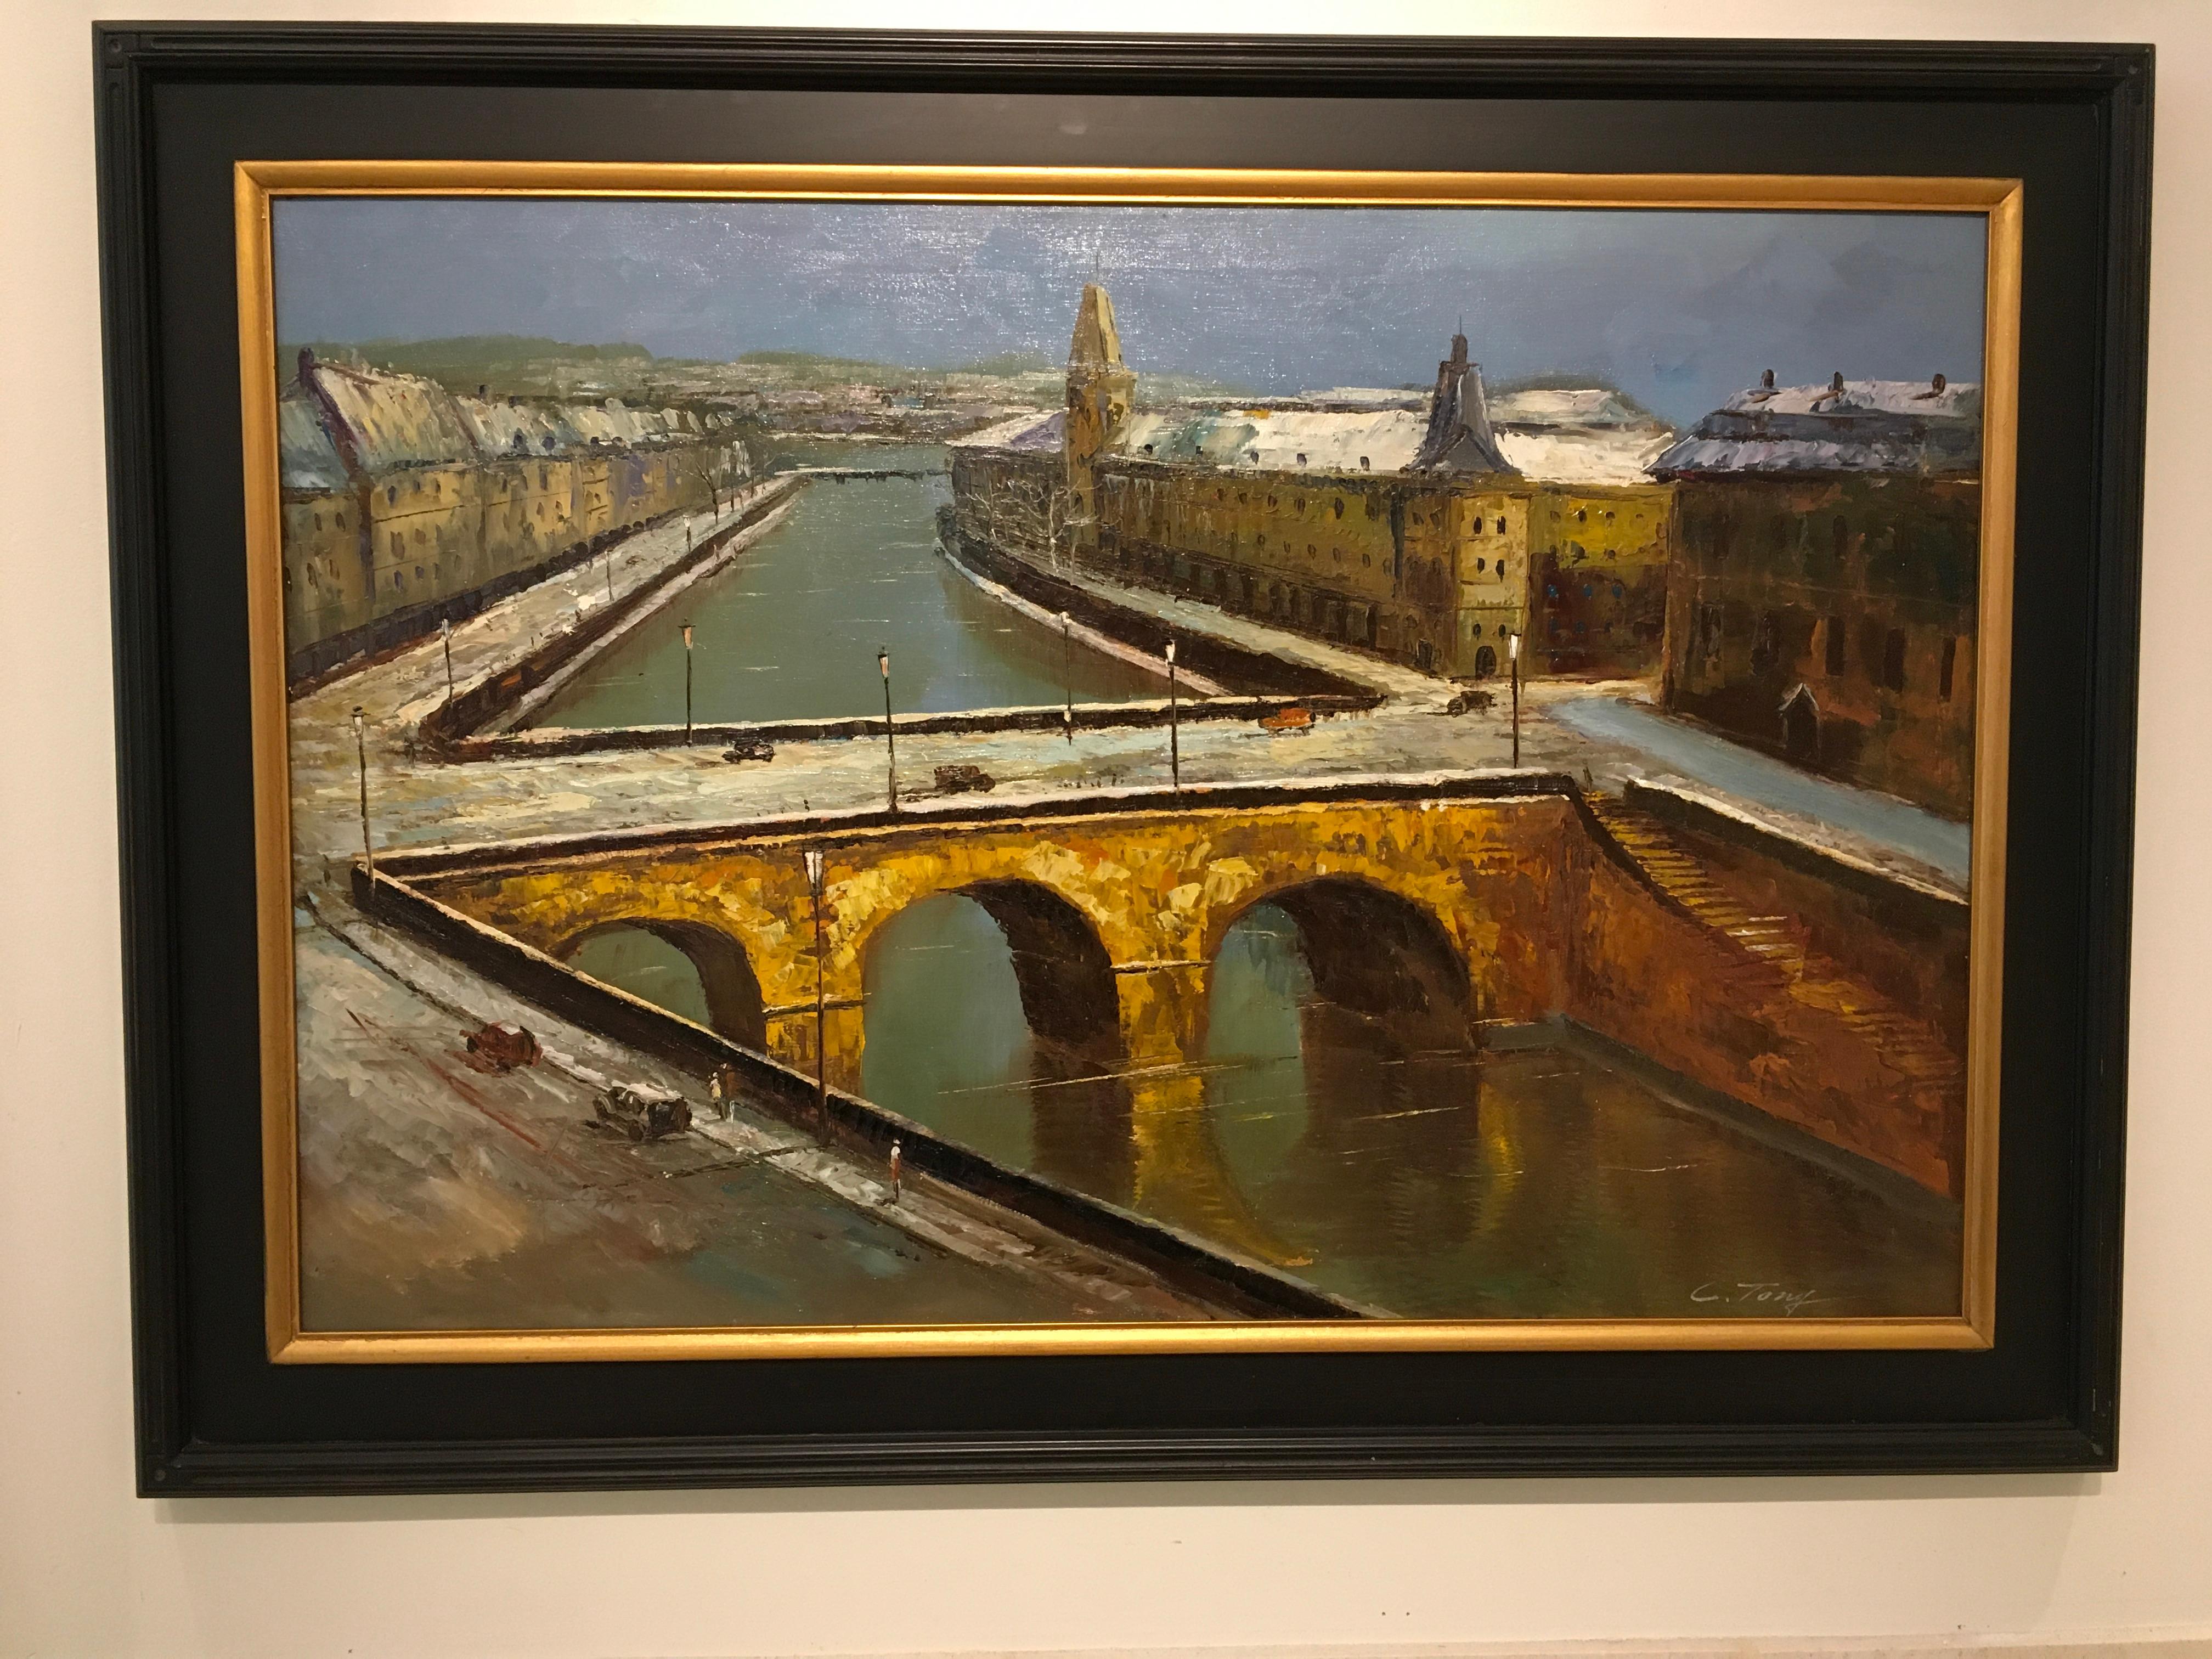 'French Impressionist Winter Scene of River Seine', by C. Tony, Oil on Canvas 7